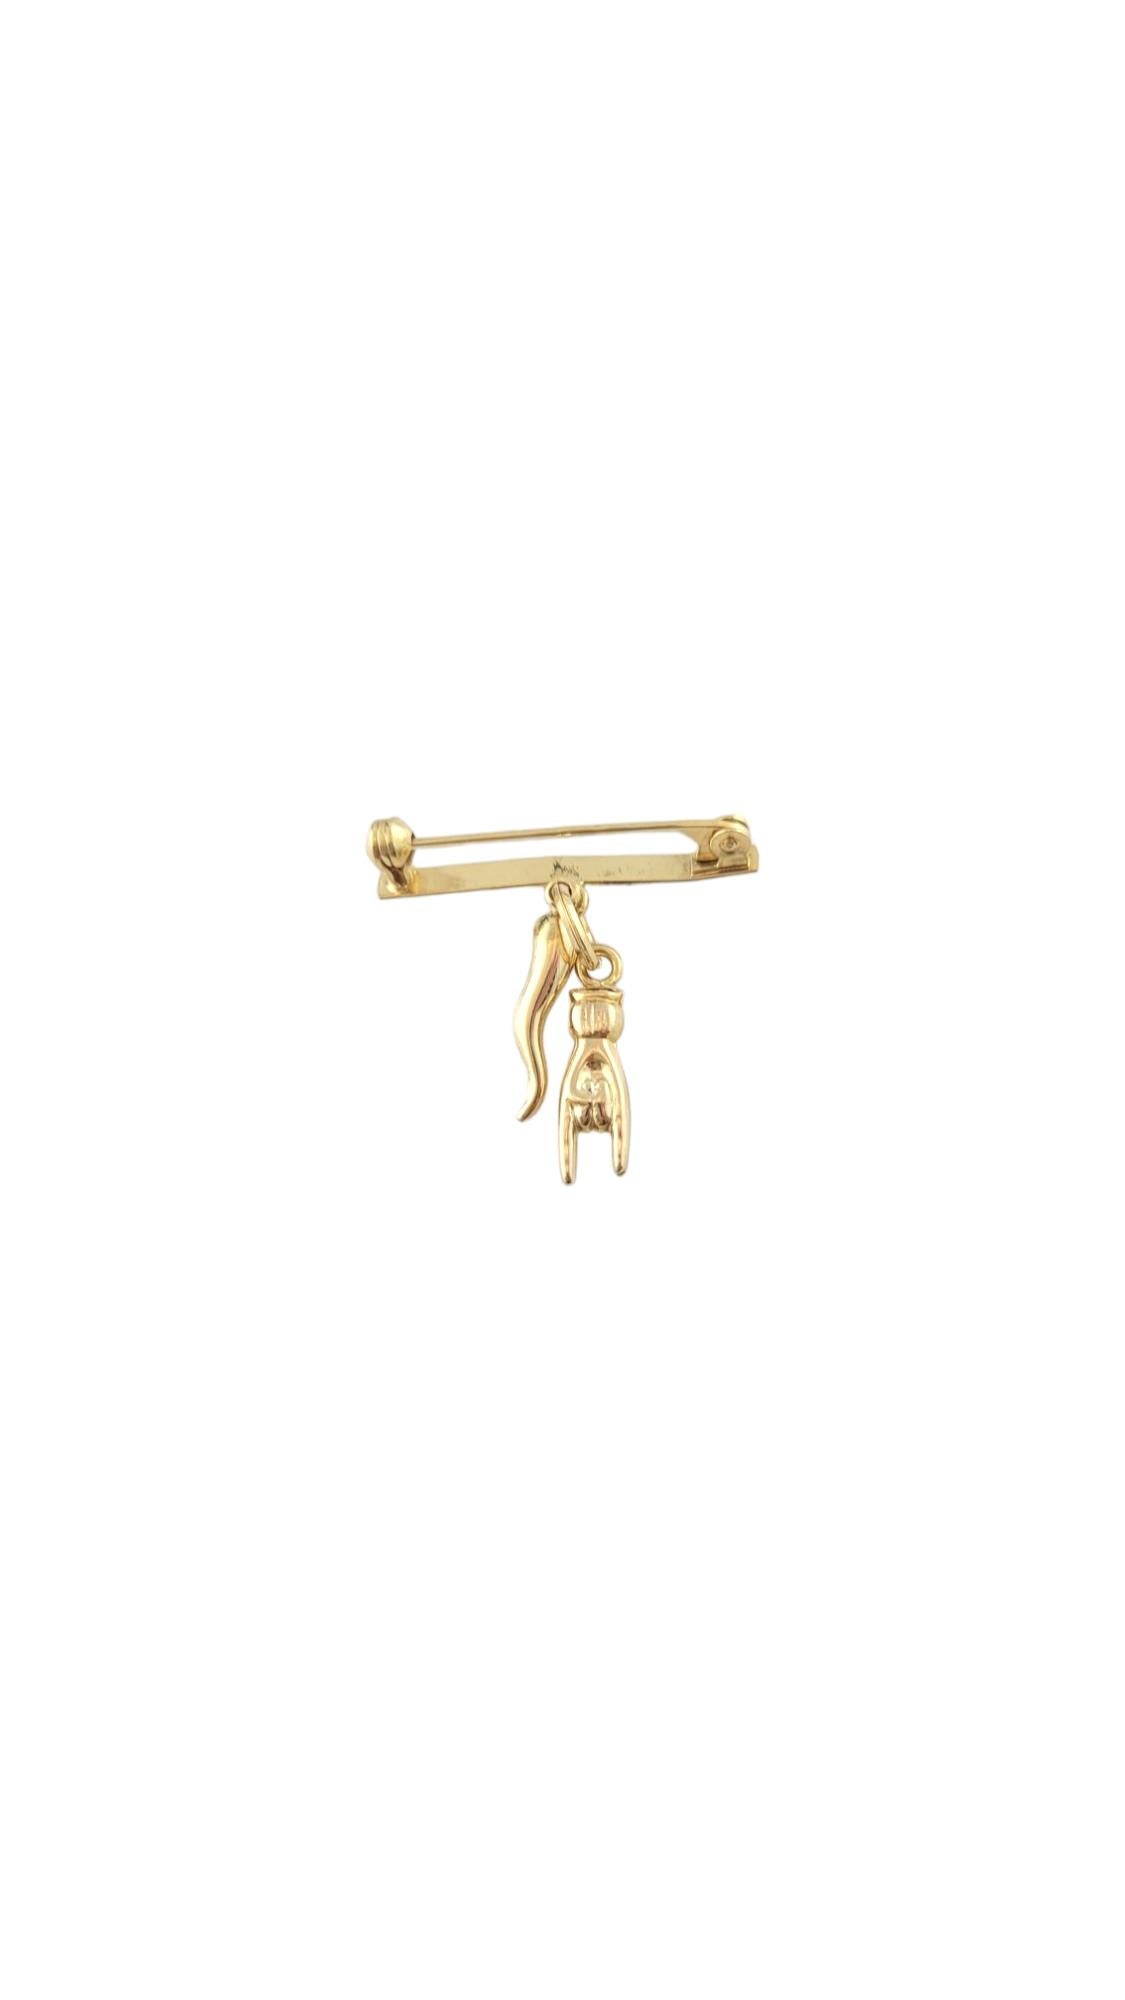 Vintage 18 Karat Yellow Gold Baby Italian Horn & Hand ( Mano Cornuto ) Pin - 

This gorgeous pin features the Italian horn & hand which represents good luck in Italian culture. 

Size: 30.5 mm x 29.2 mm x 8.6 mm. 

Stamped: 750

Weight: 2.2 dwt./